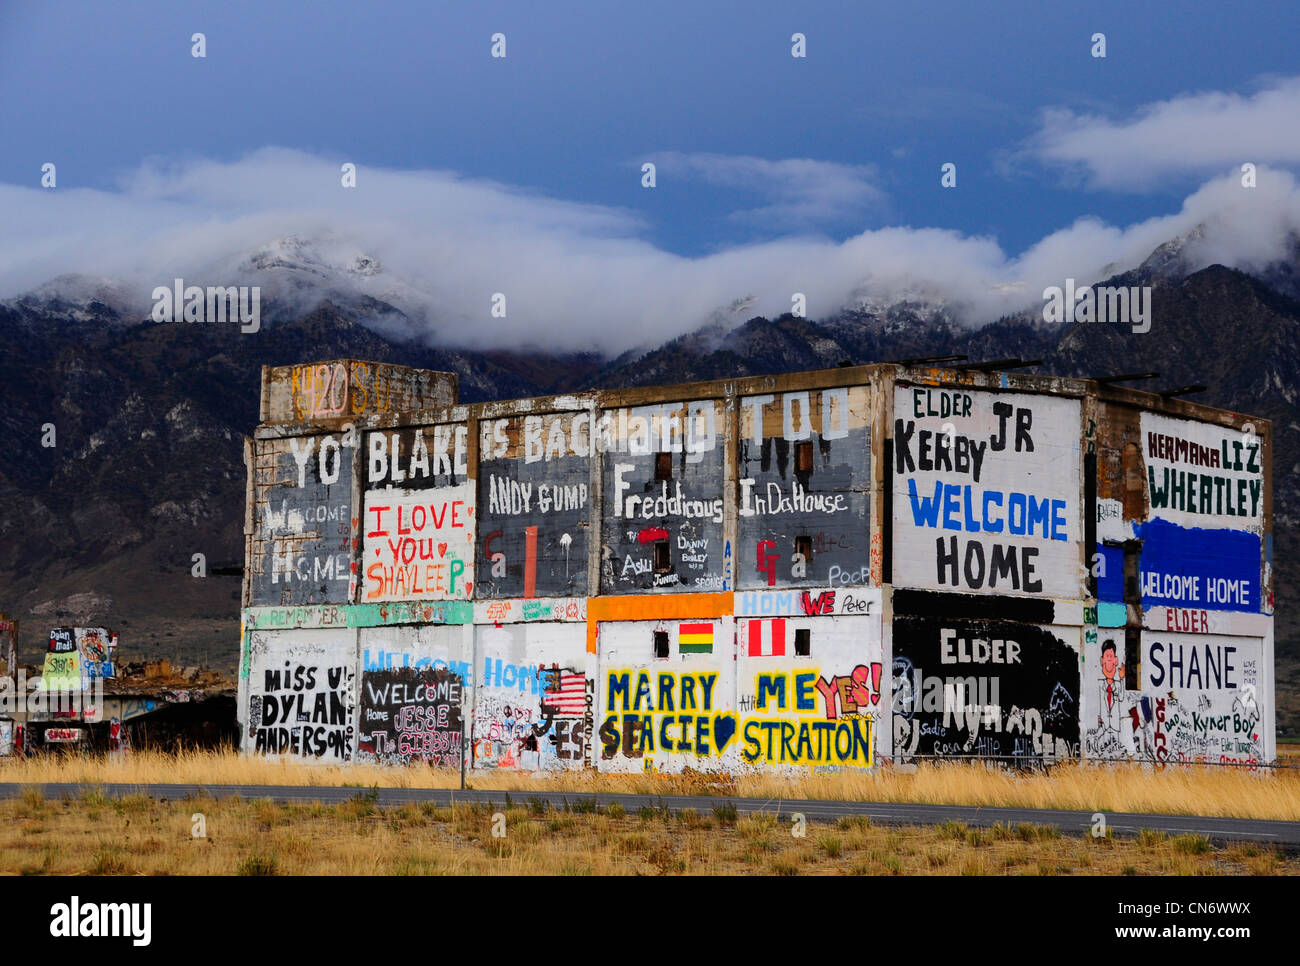 Graffiti on abandoned building along Interstate 15 in Northern Utah. Stock Photo